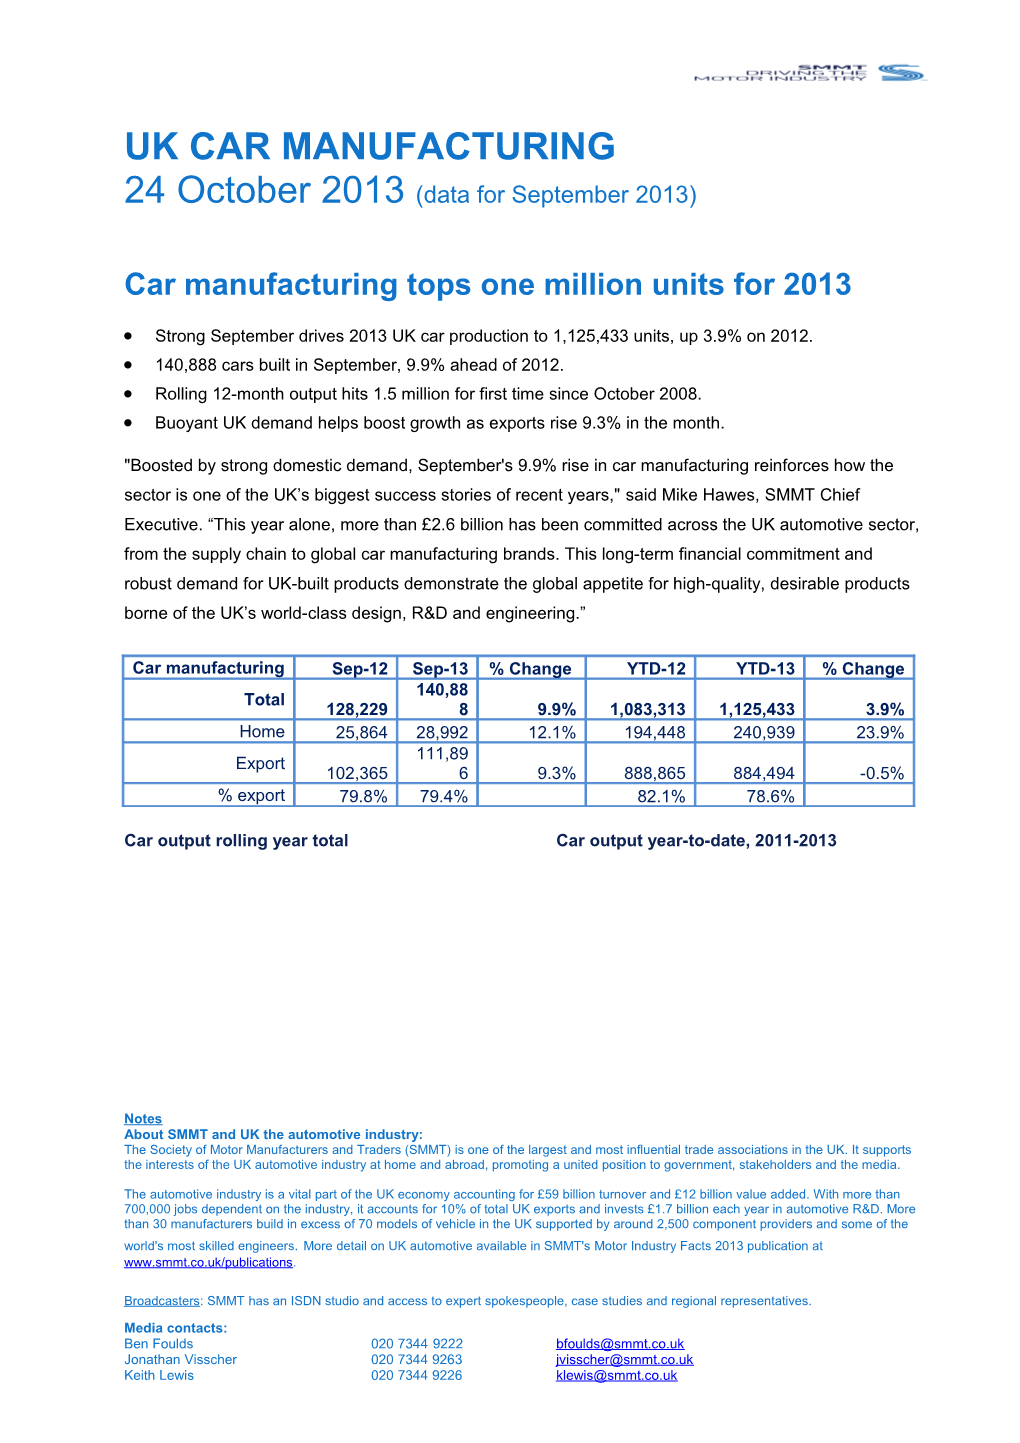 Car Manufacturing Tops One Million Units for 2013